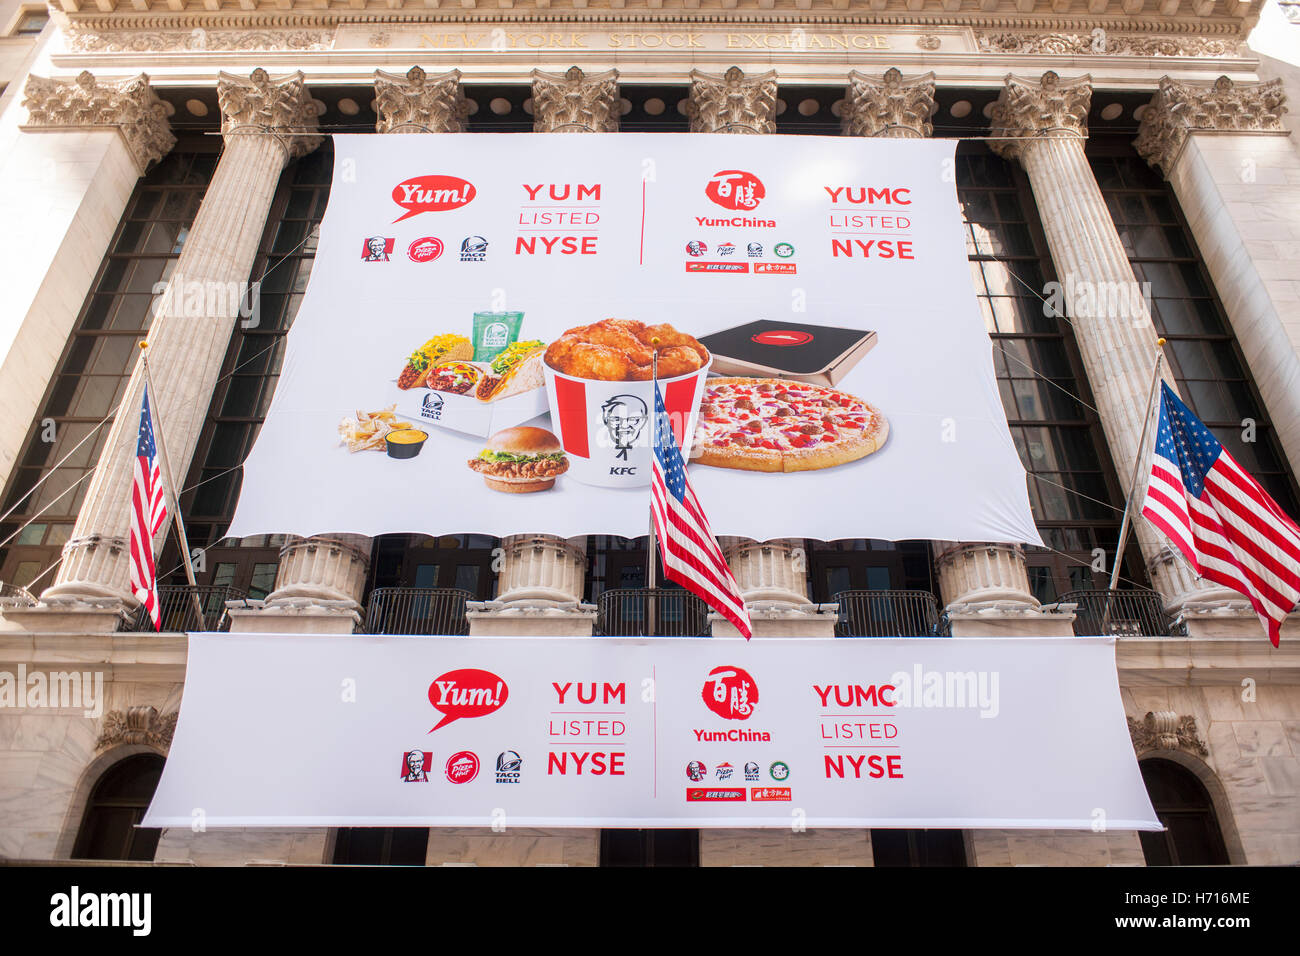 The New York Stock Exchange is decorated for the first day of trading of Yum China Holdings after its separation from Yum Brands. Yum China has exclusive rights to KFC, Pizza Hut and Taco bell in China. The company will trade under the symbol "YUMC".  (© Richard B. Levine) Stock Photo